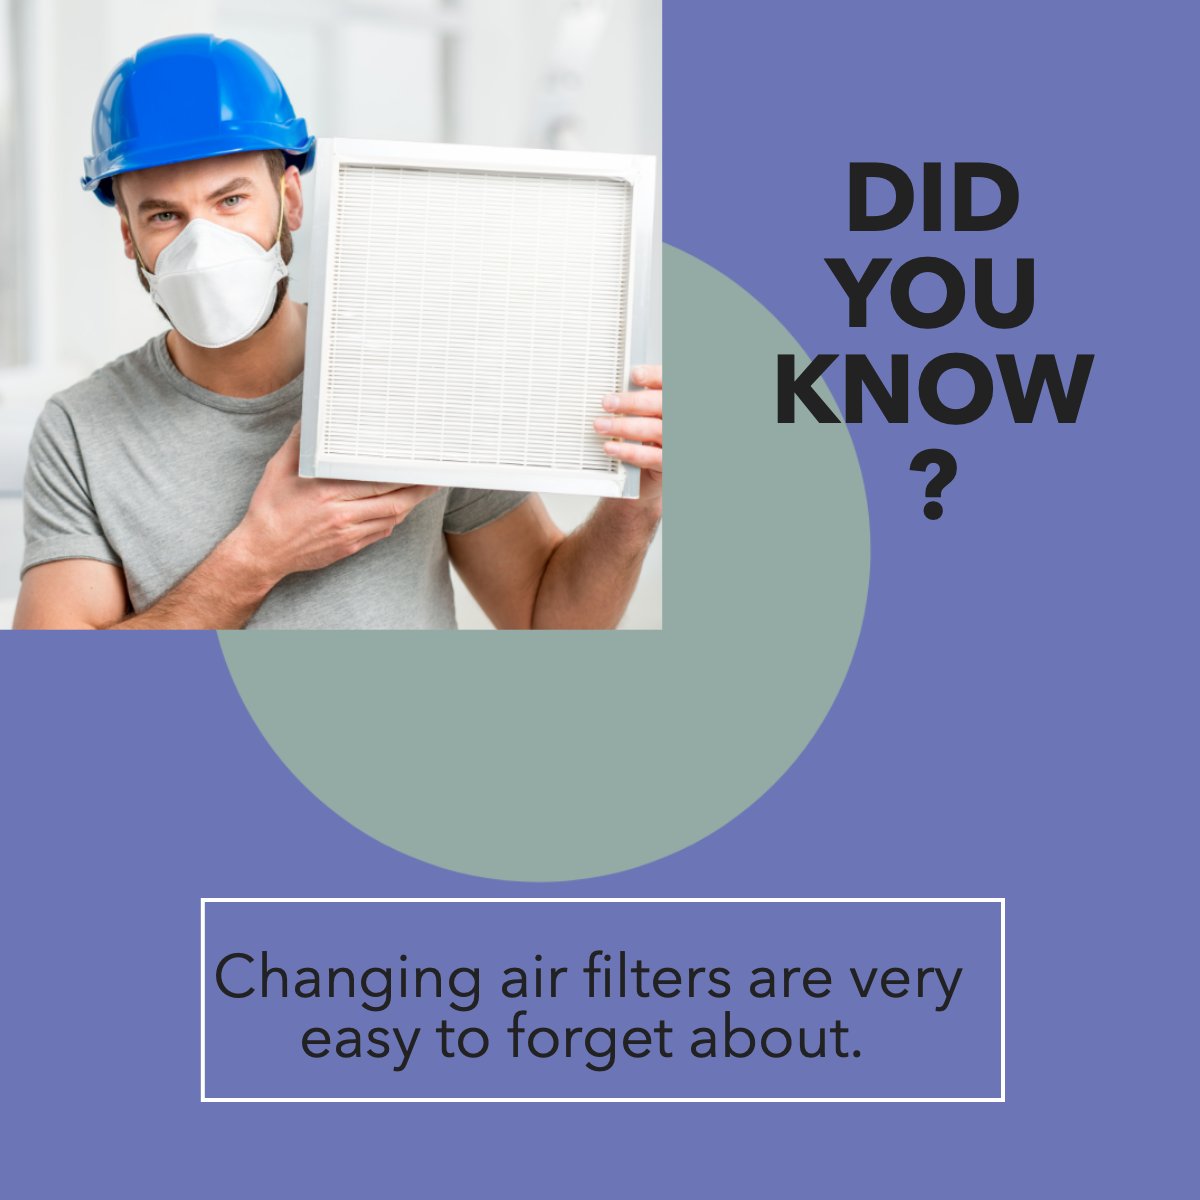 The longest you should go without changing your air filter is the recommended 90 days. 

Did you know this? 🤔

#airfilter #cleanairfilter #airquality